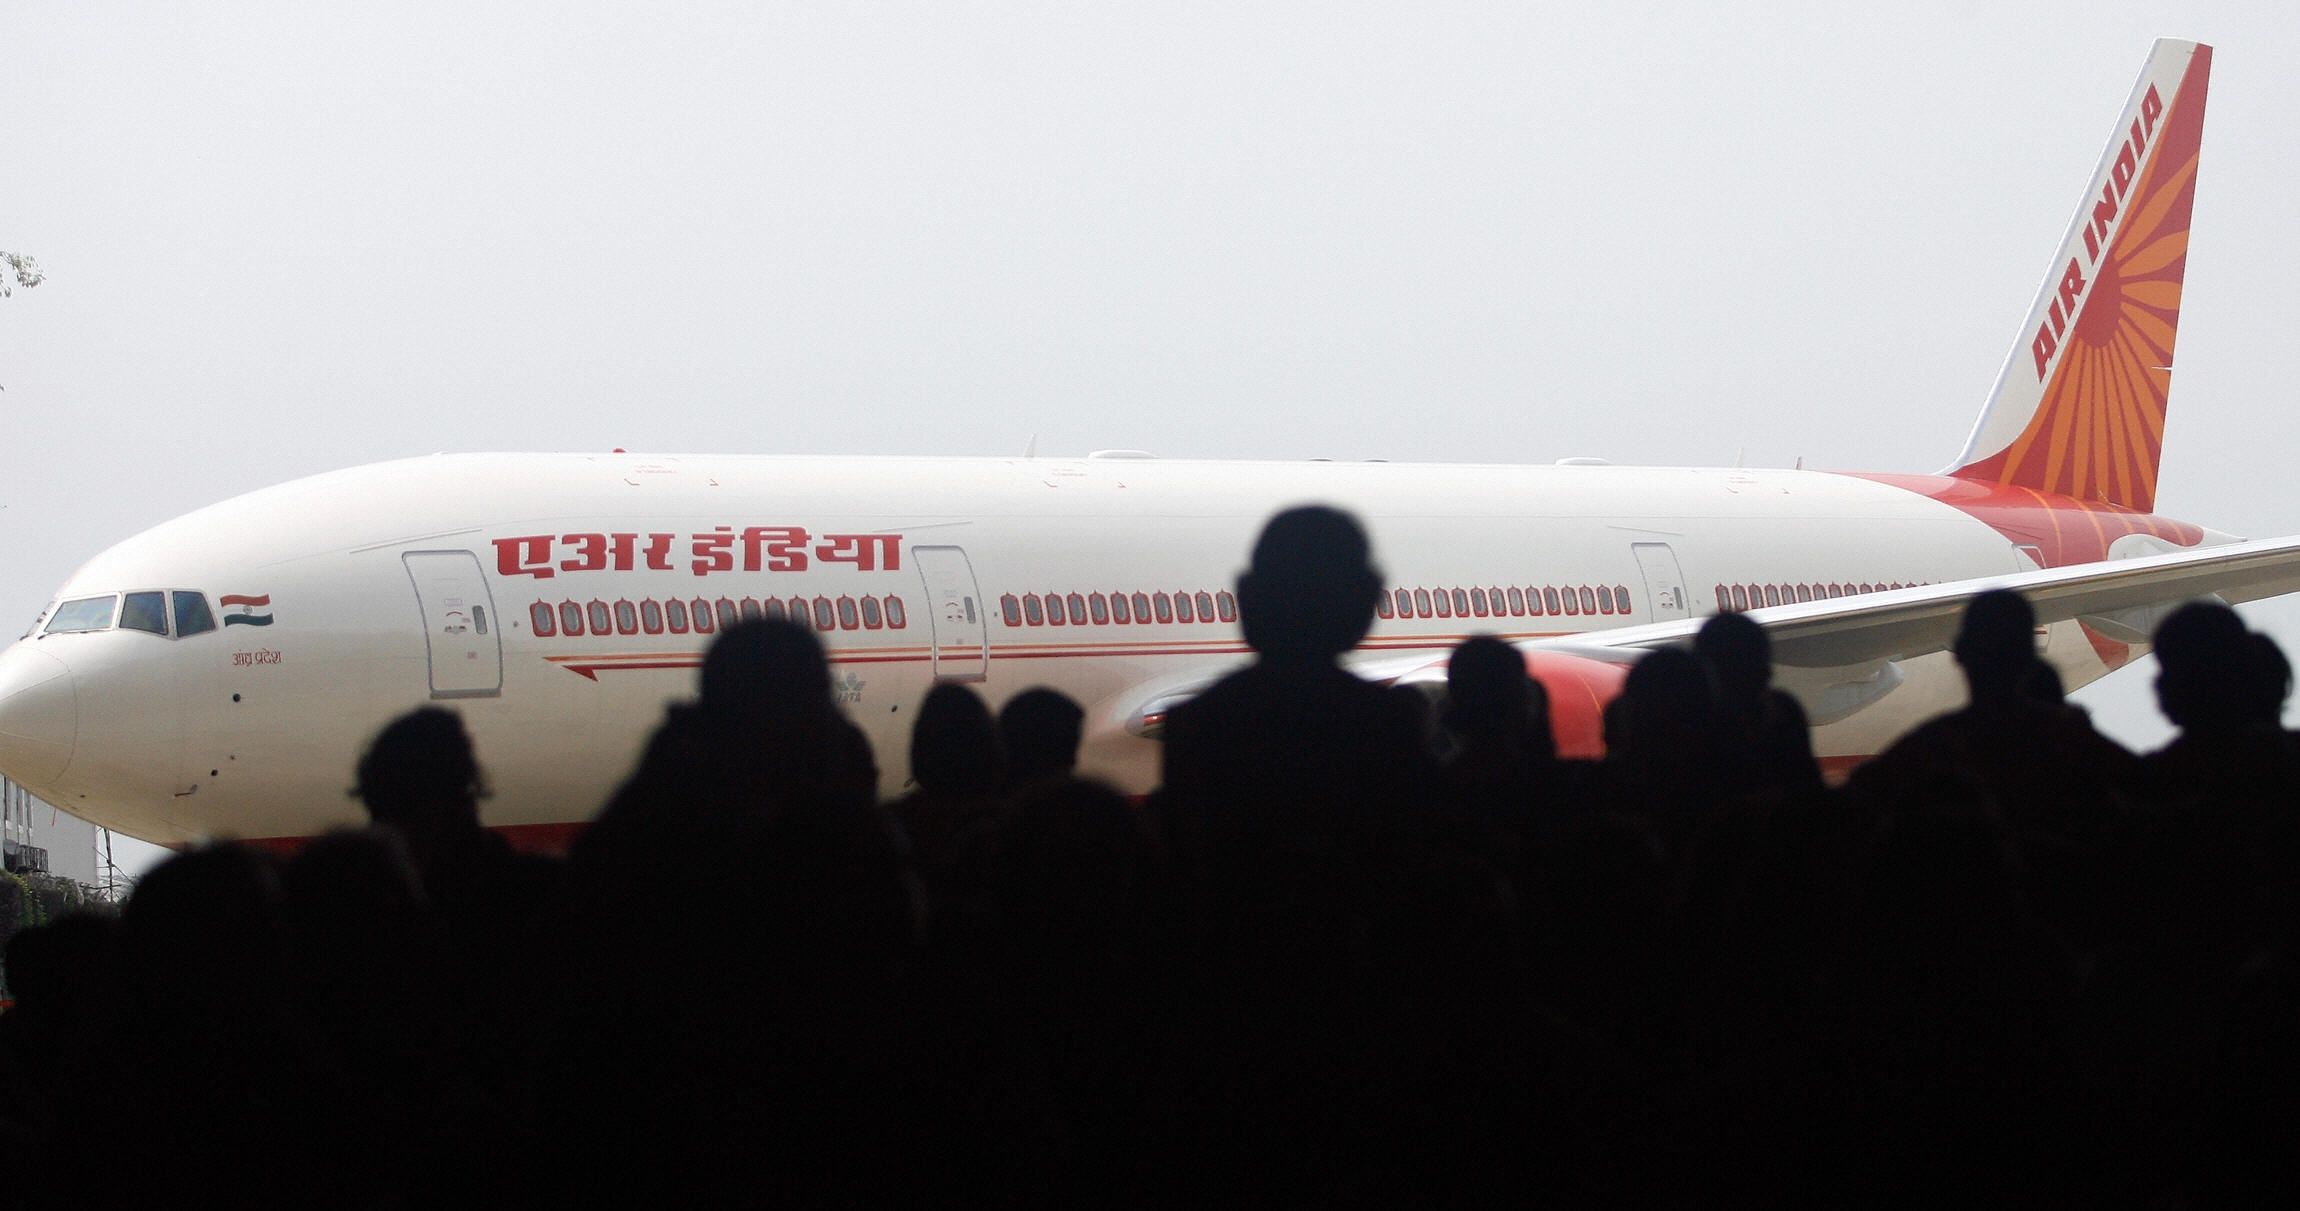 Air India employees look at the newly acquired Boeing 777-200LR aircraft